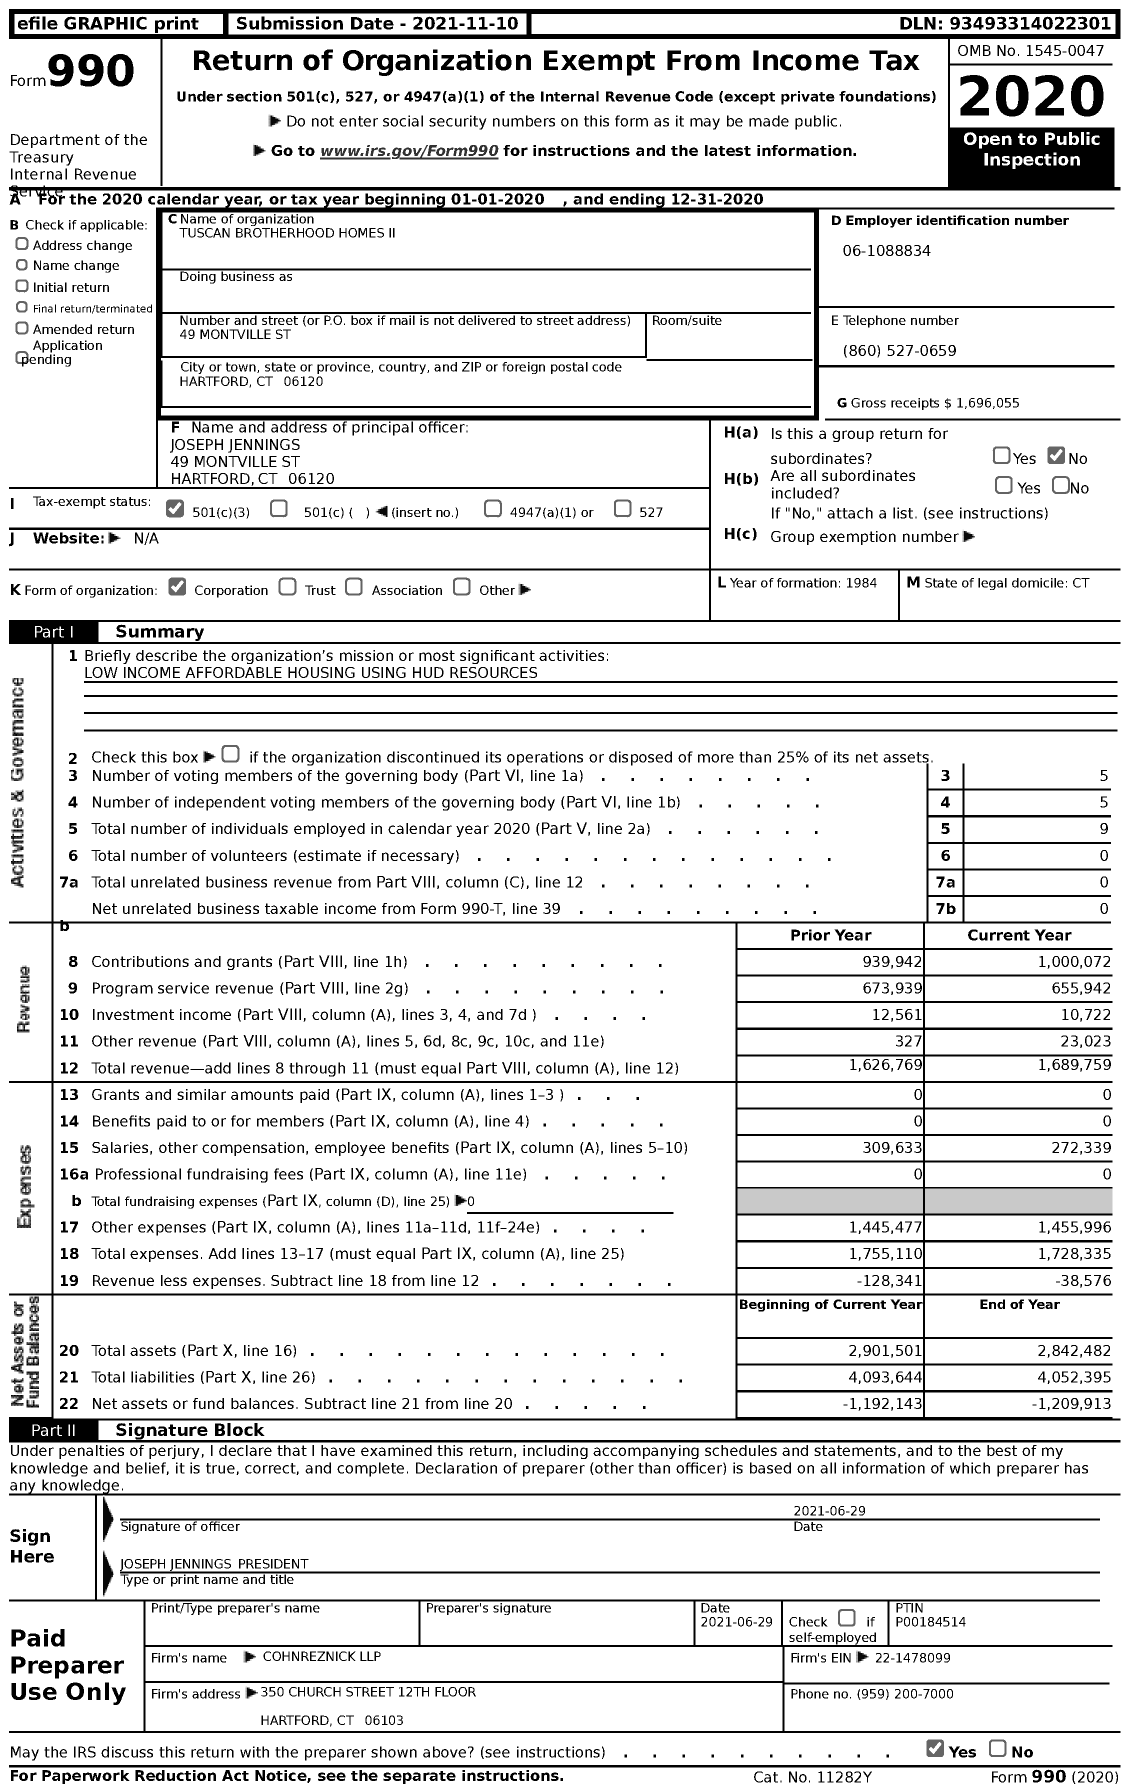 Image of first page of 2020 Form 990 for Tuscan Brotherhood Homes II